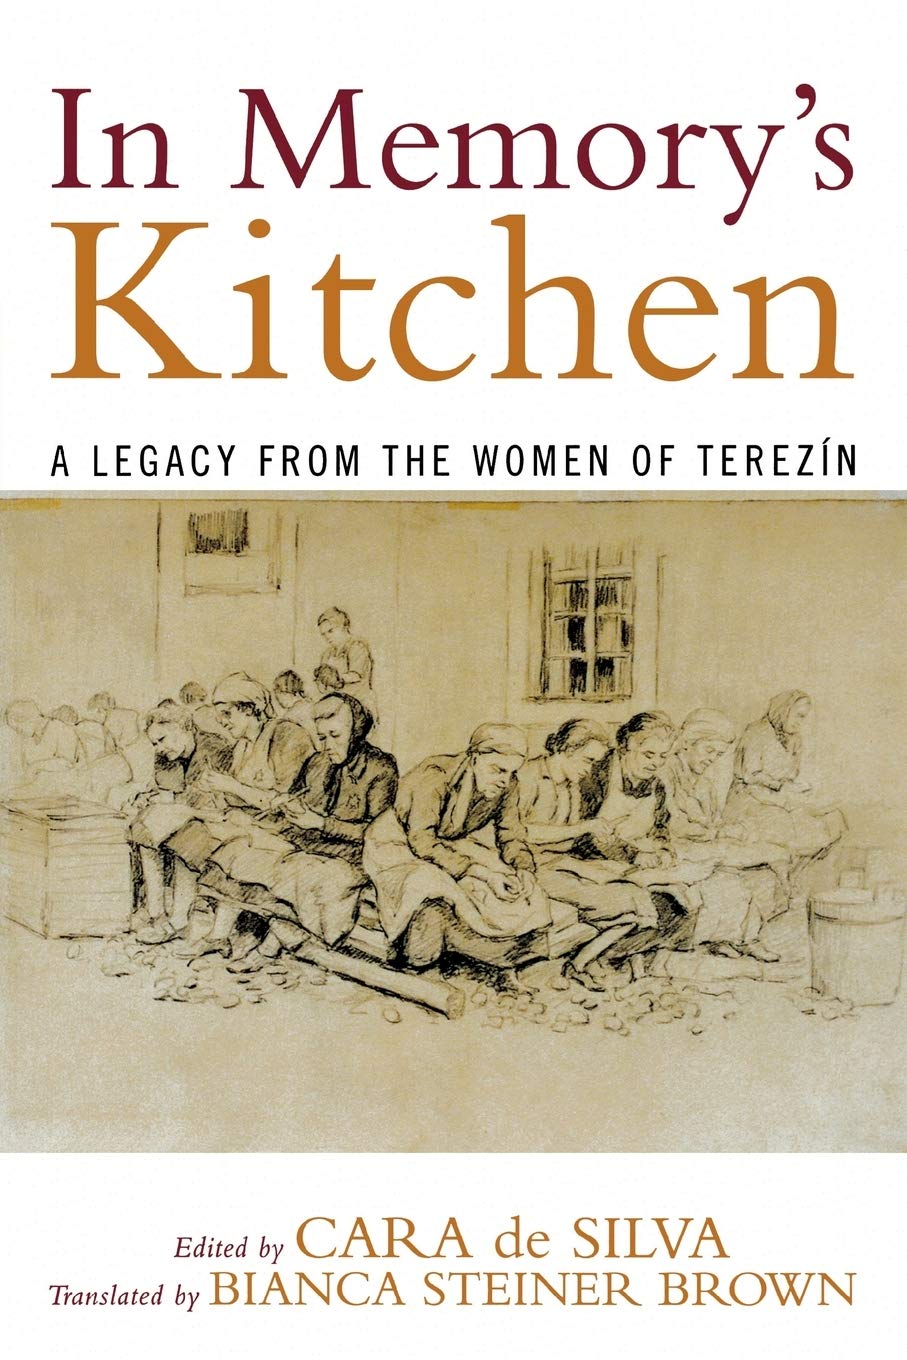 In Memory's Kitchen: The Legacy from the Women of Terezín (Cara de Silva)